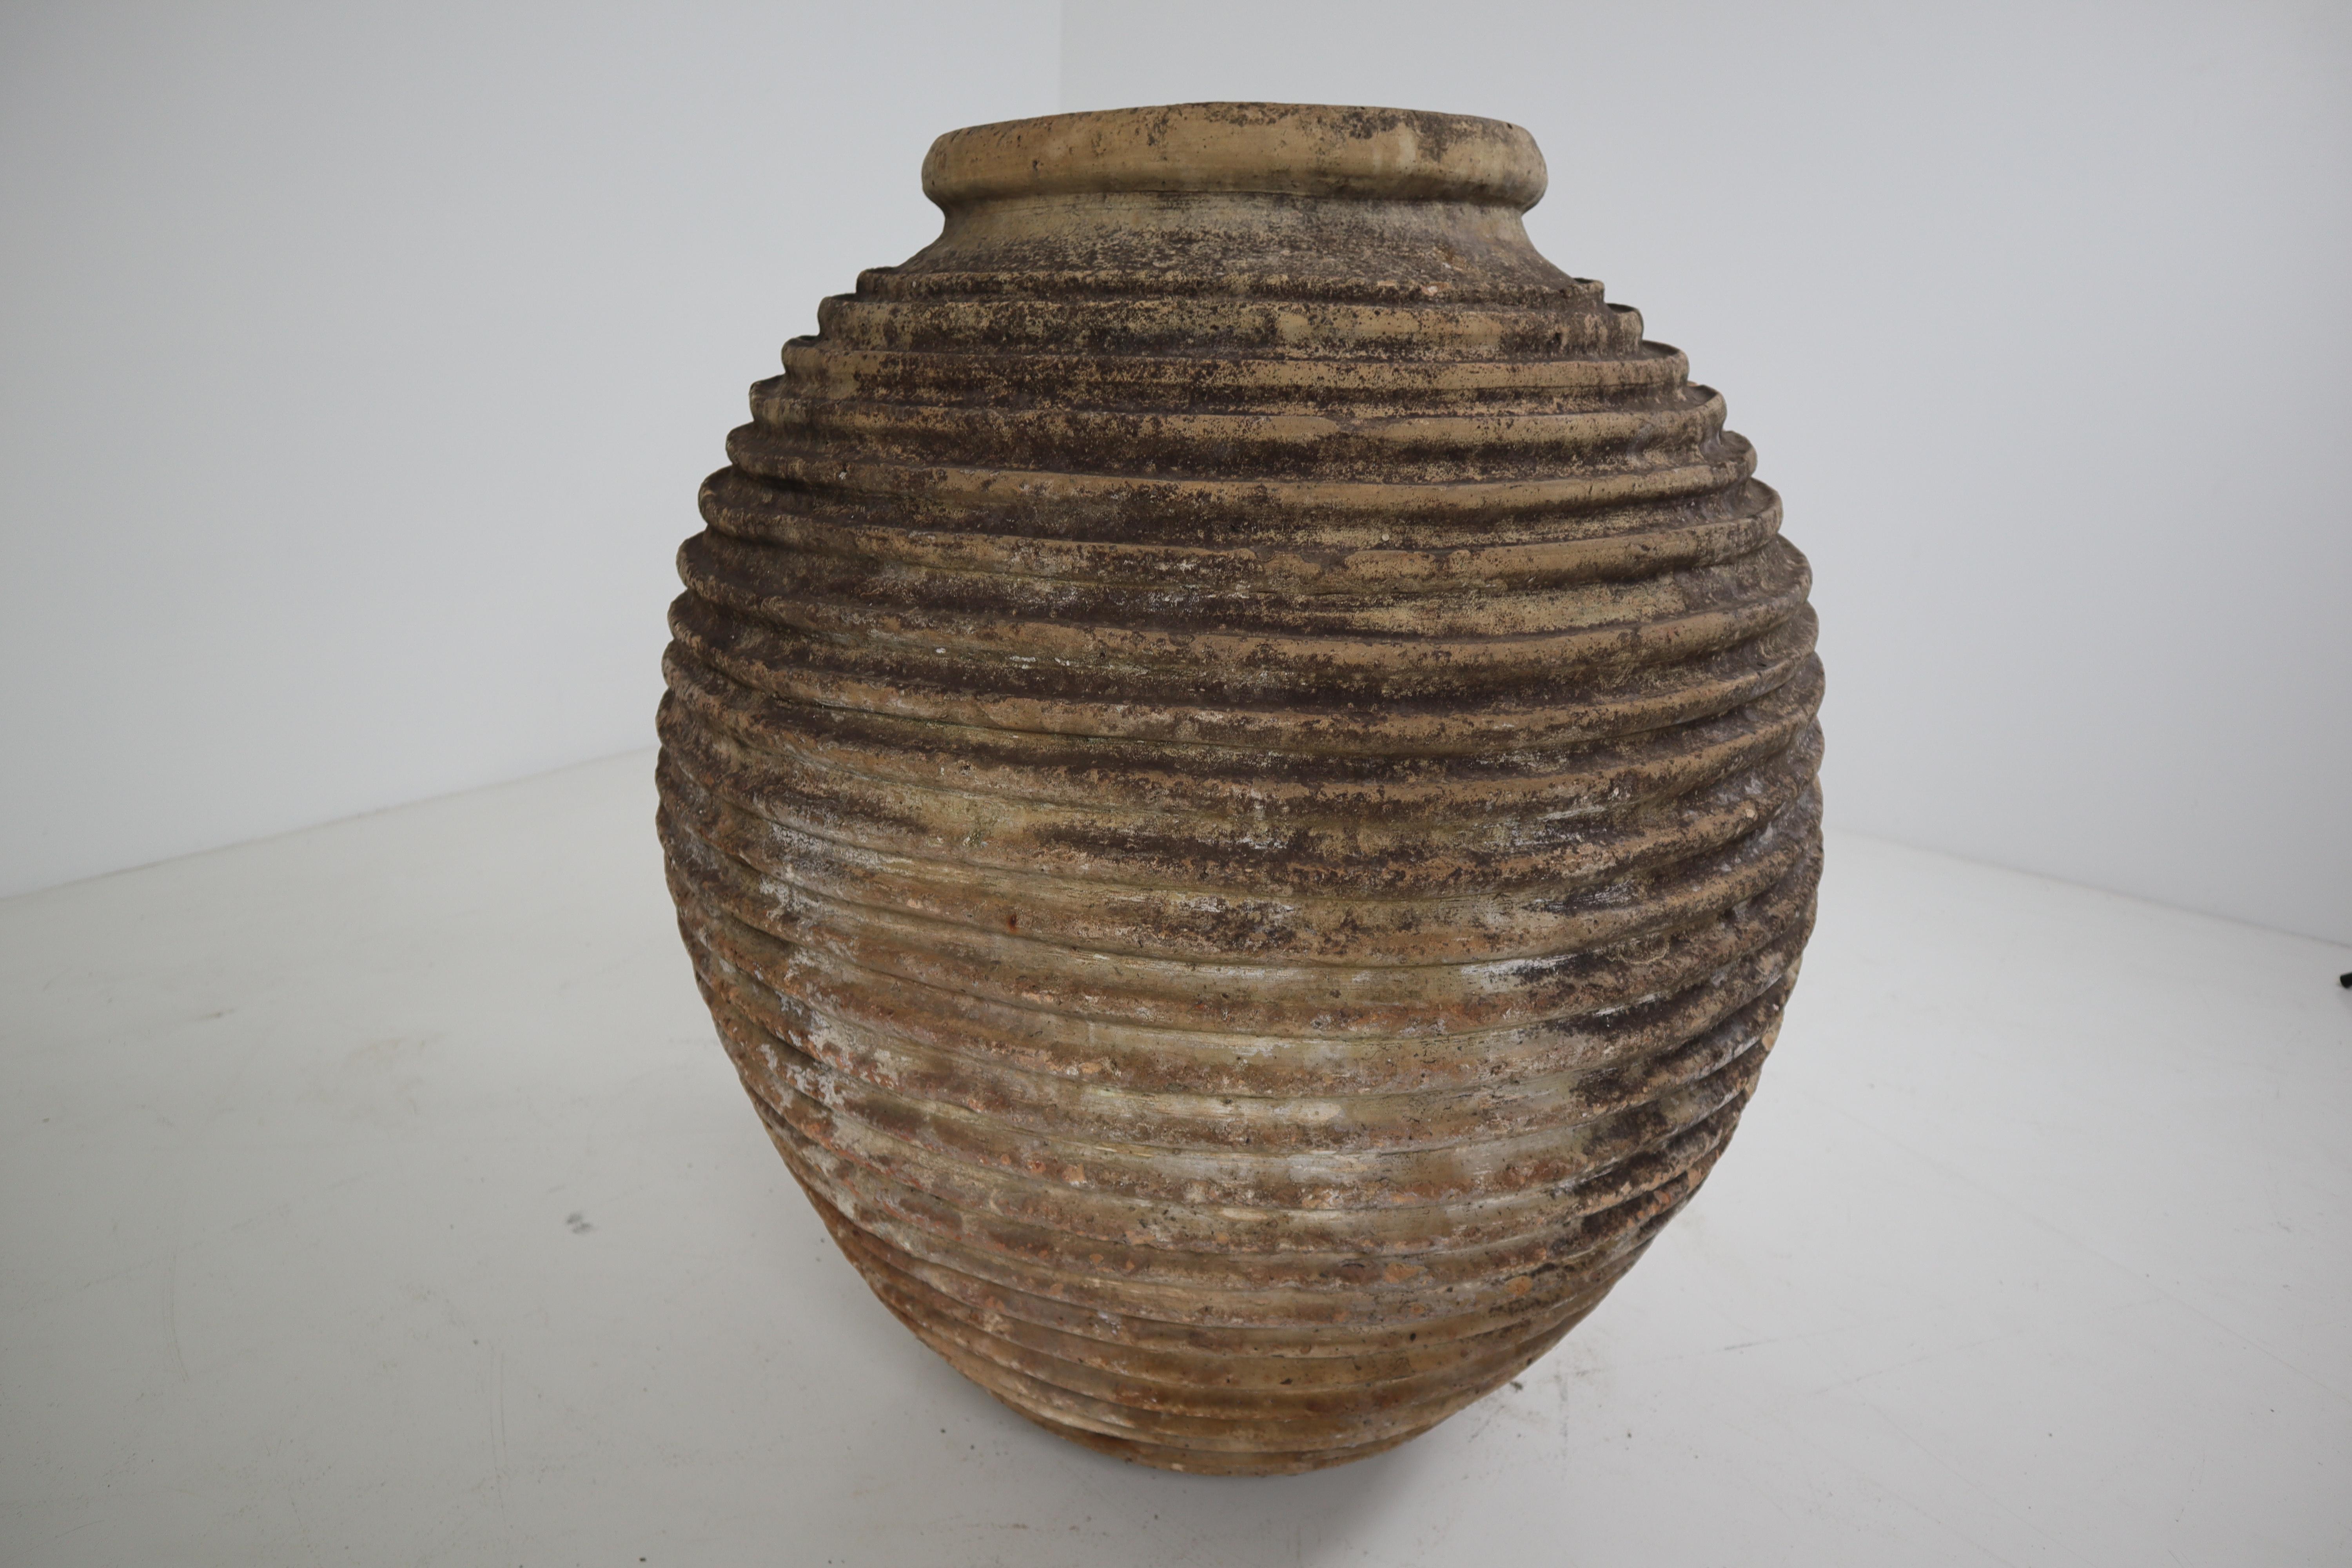 French Provincial 19th Century Greek 'King-Size' Ribbed Olive Jar with Dark Lichen Patination